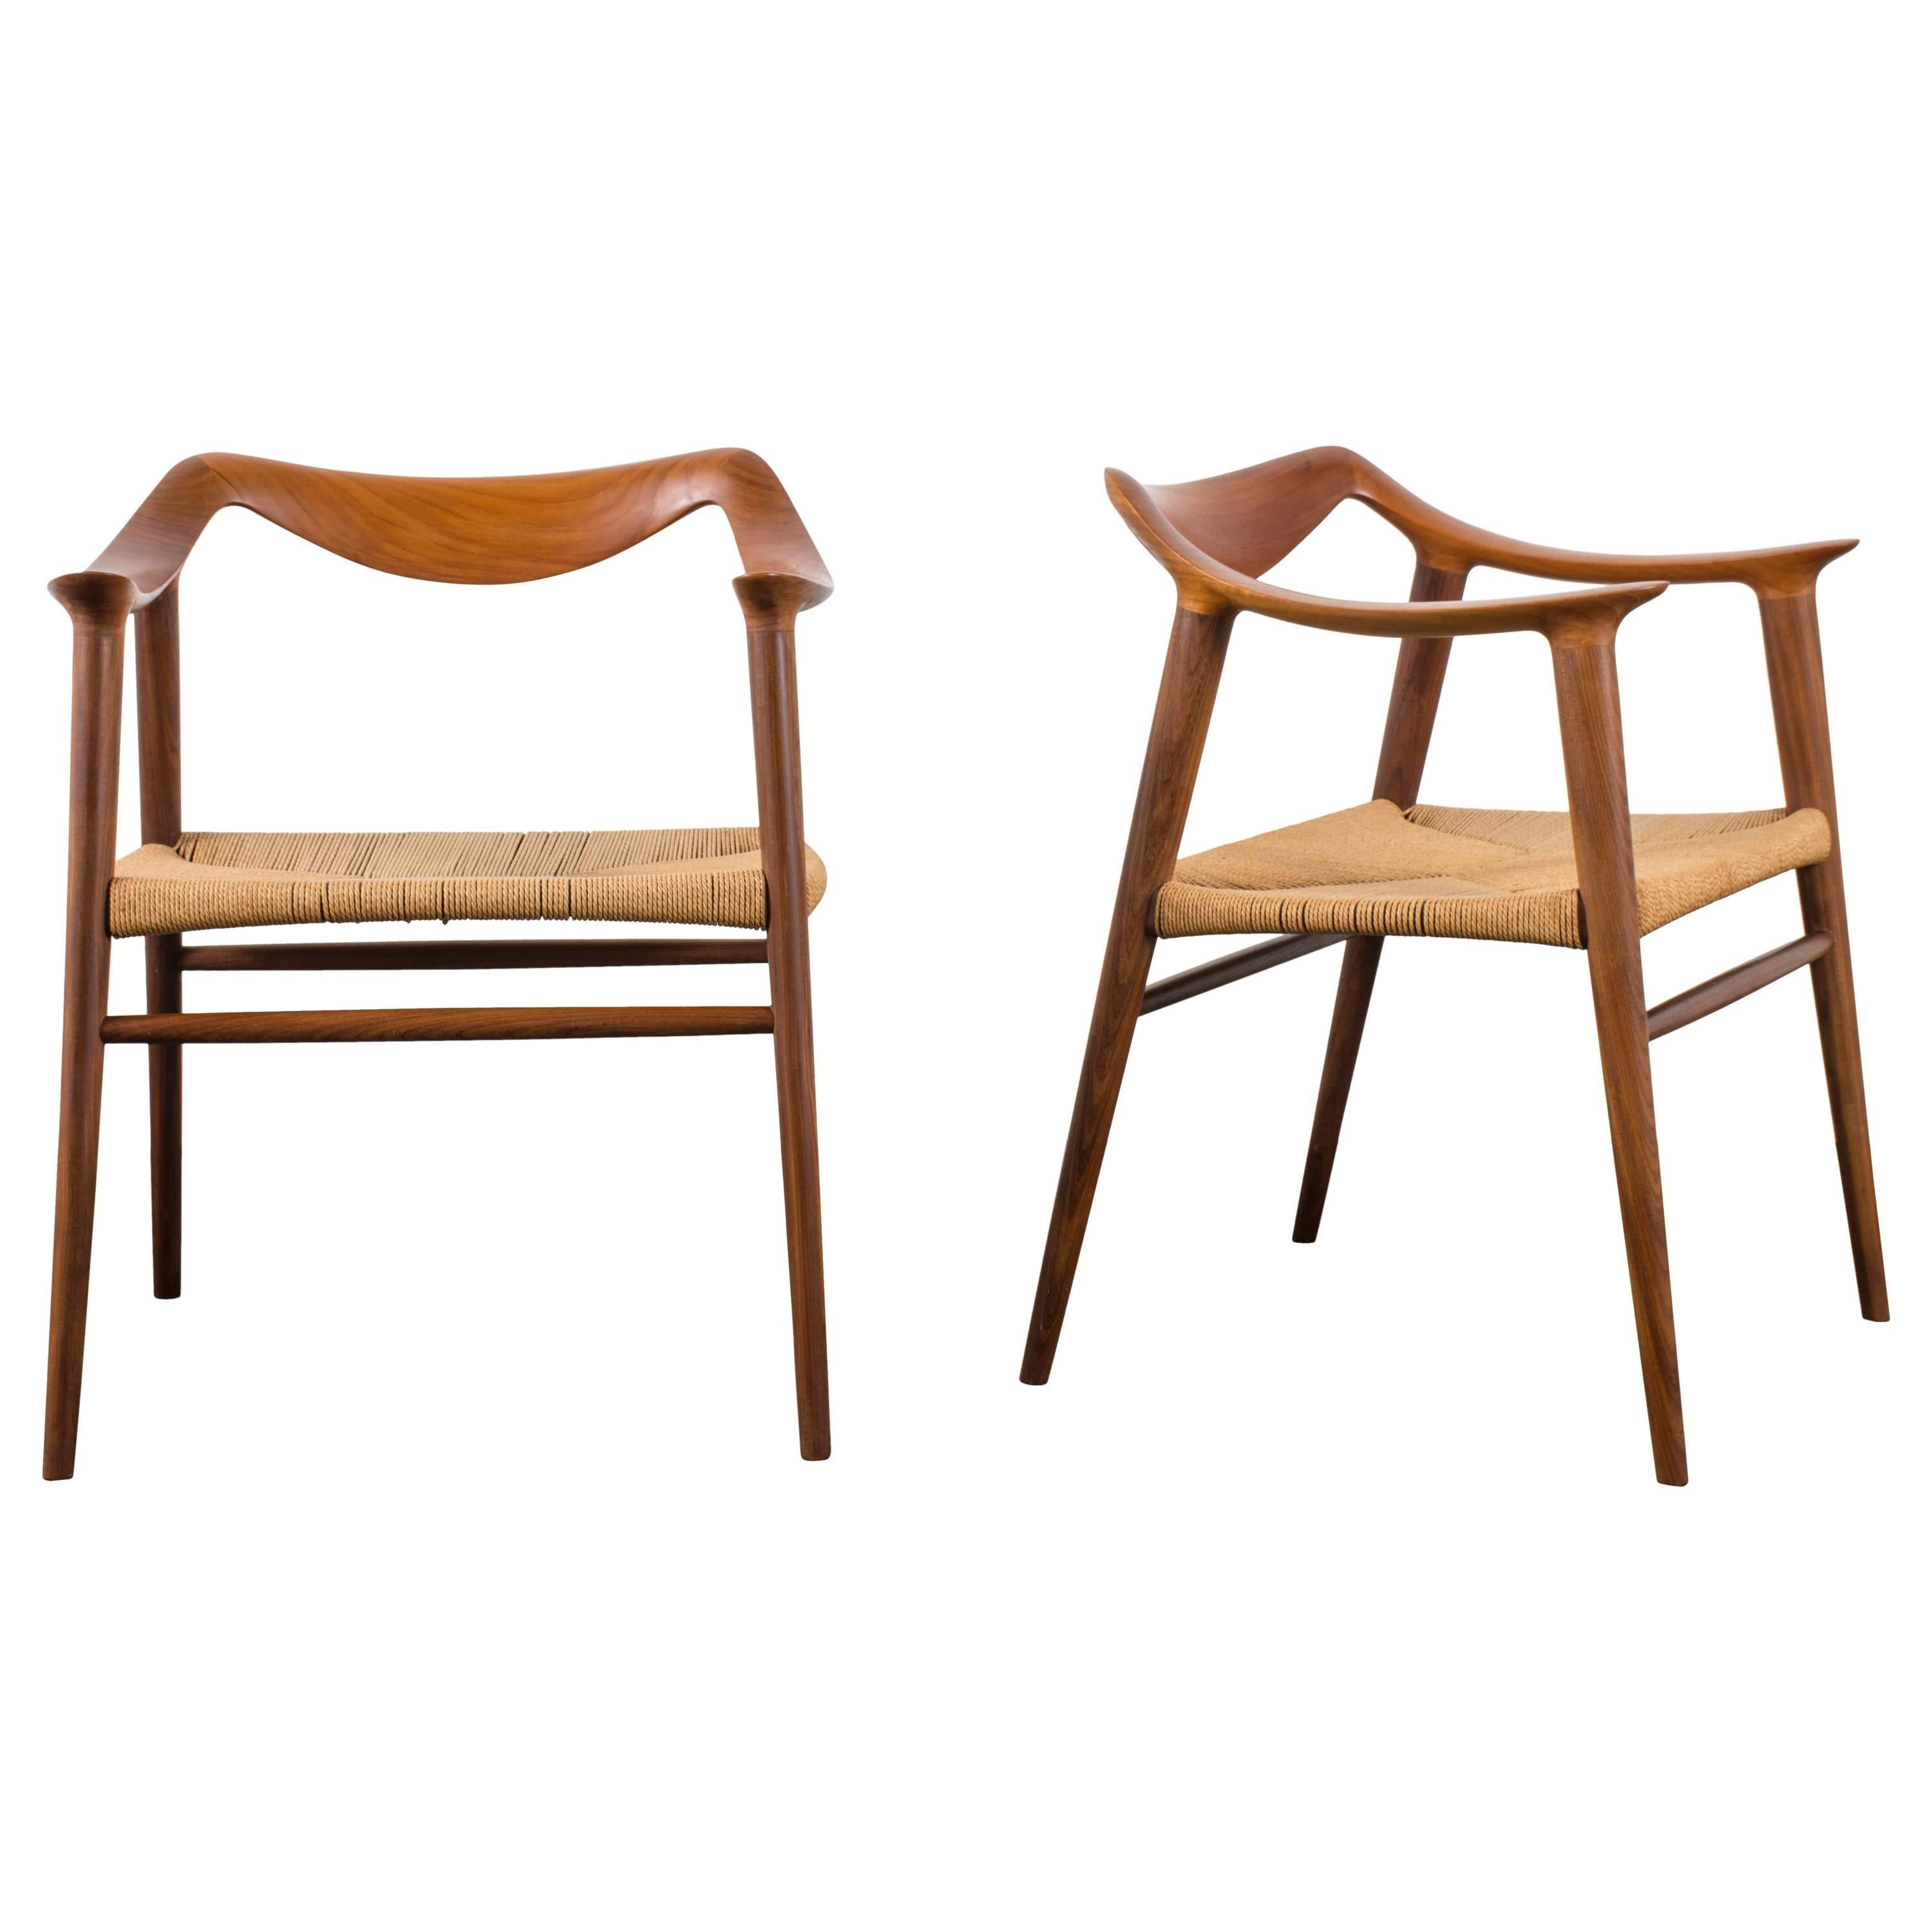 Pair of Vintage Bambi Chairs by Rolf Rastad & Adolf Relling for Gustav Bahus